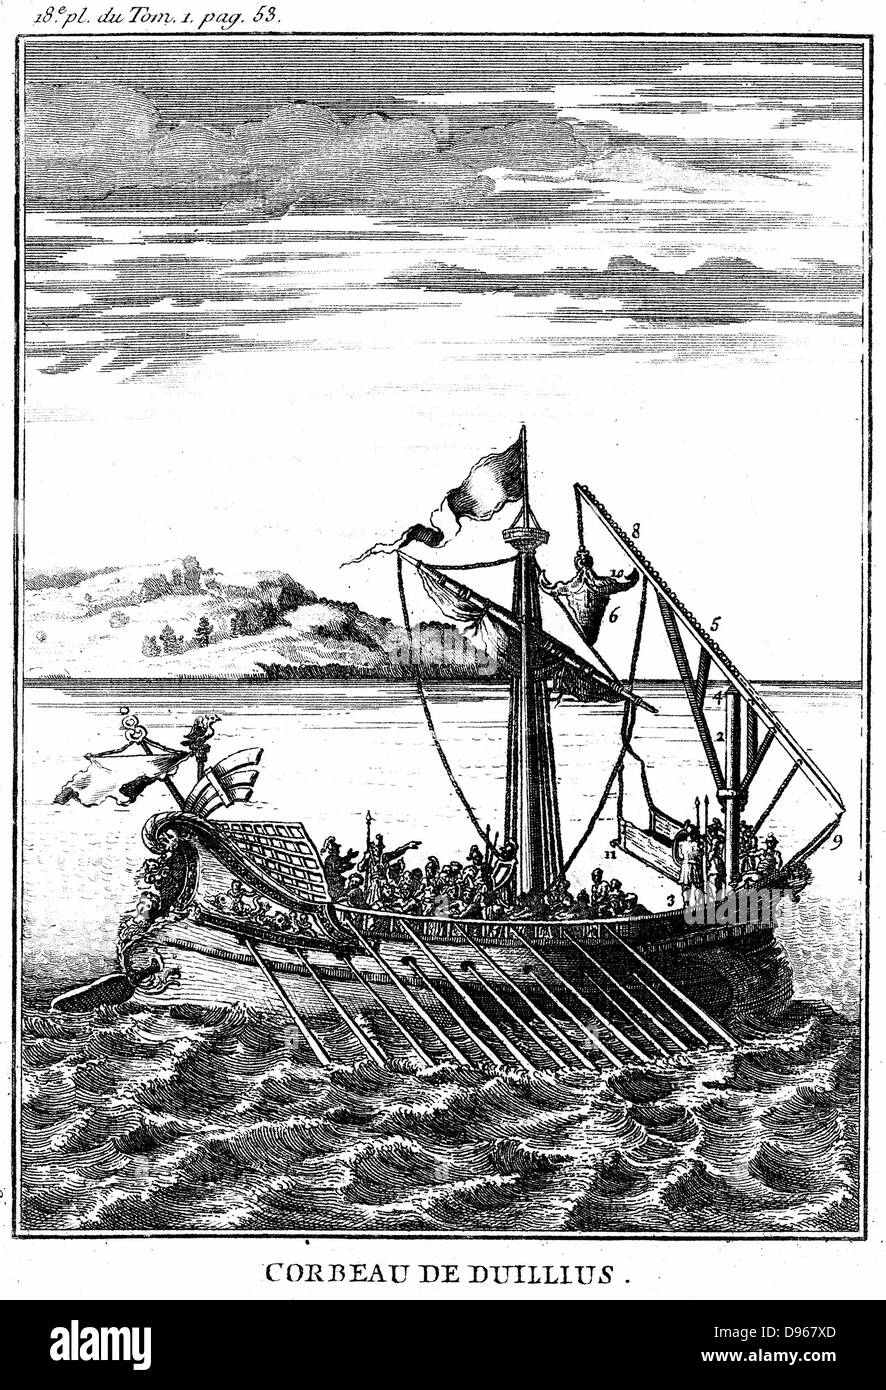 Roman war galley equipped with a corvus (right). 18th century copperplate engraving. Stock Photo